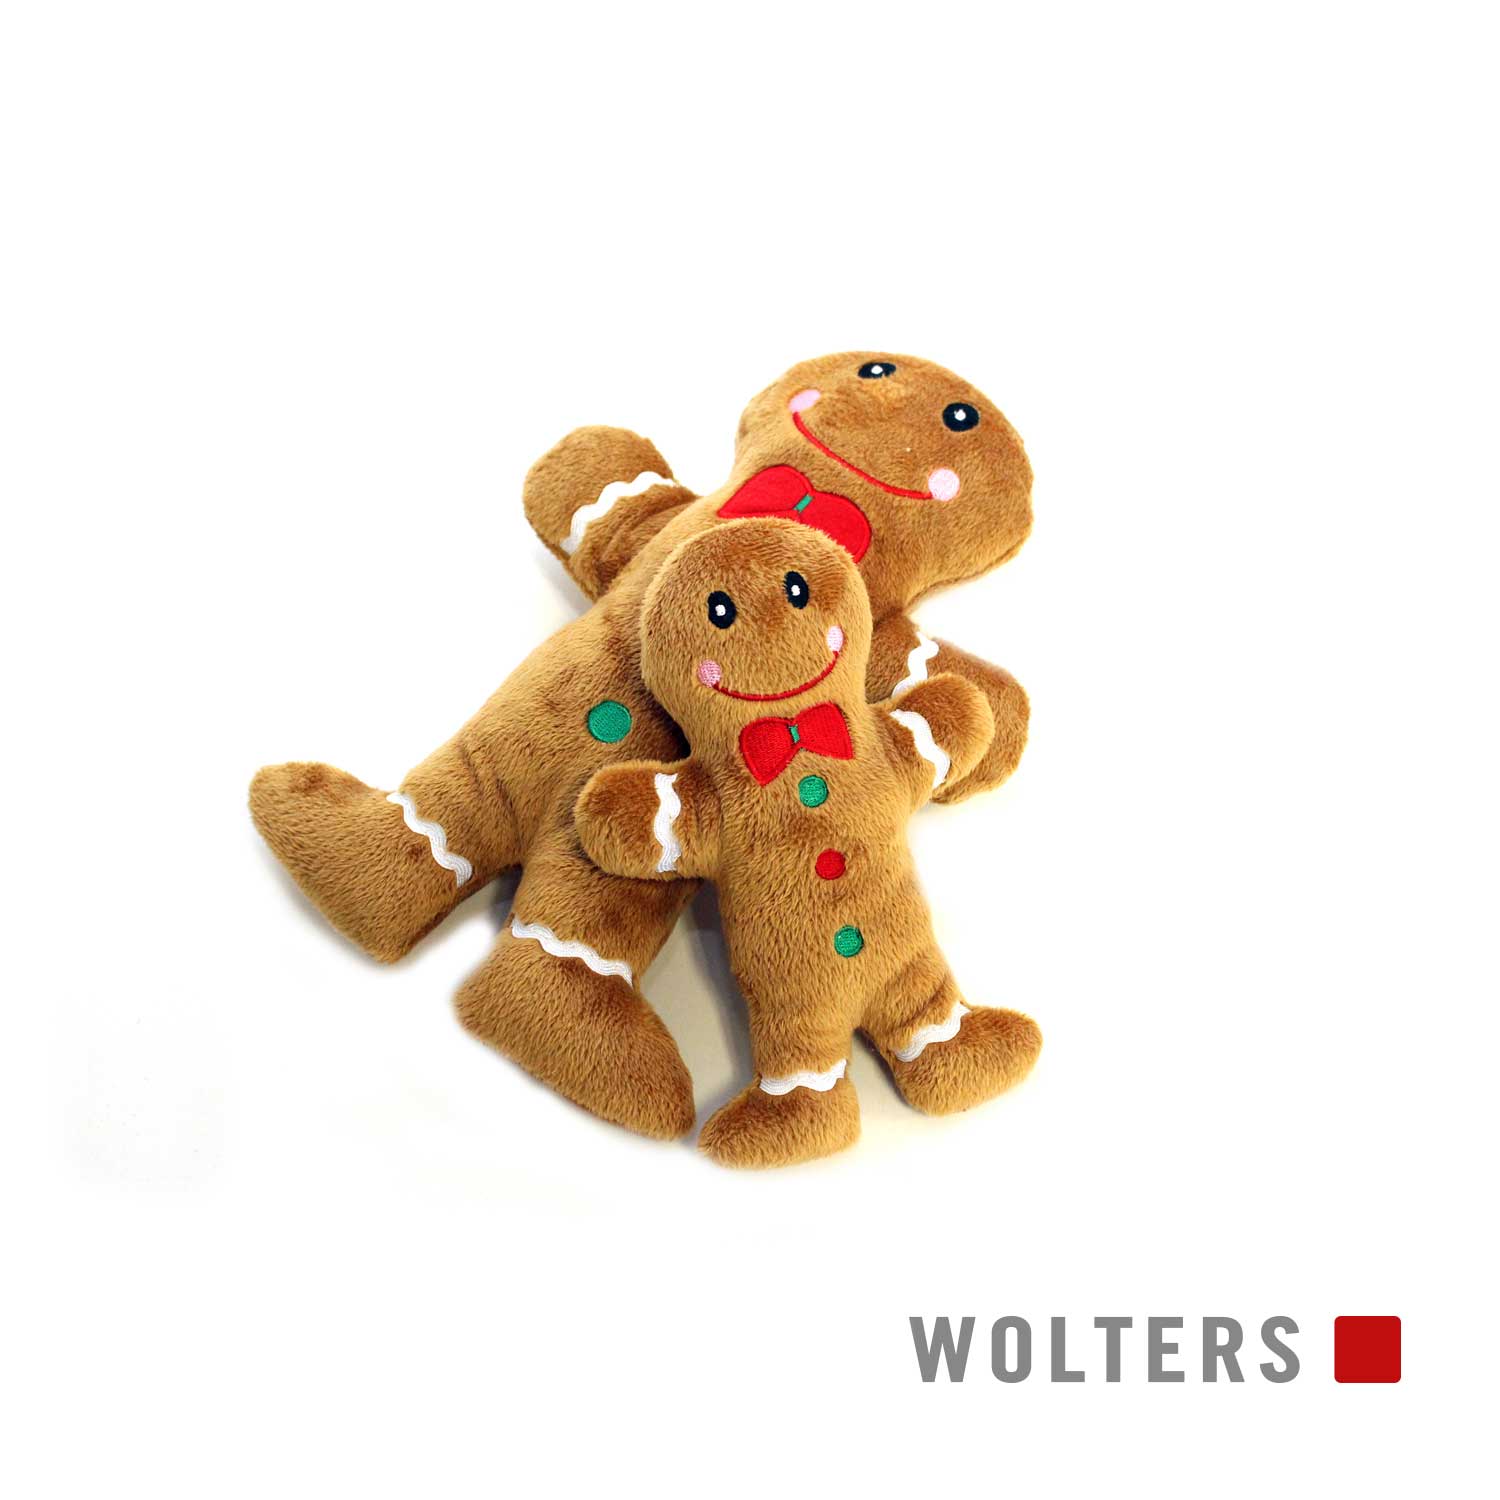 Wolters - "Candy Man" in 18cm